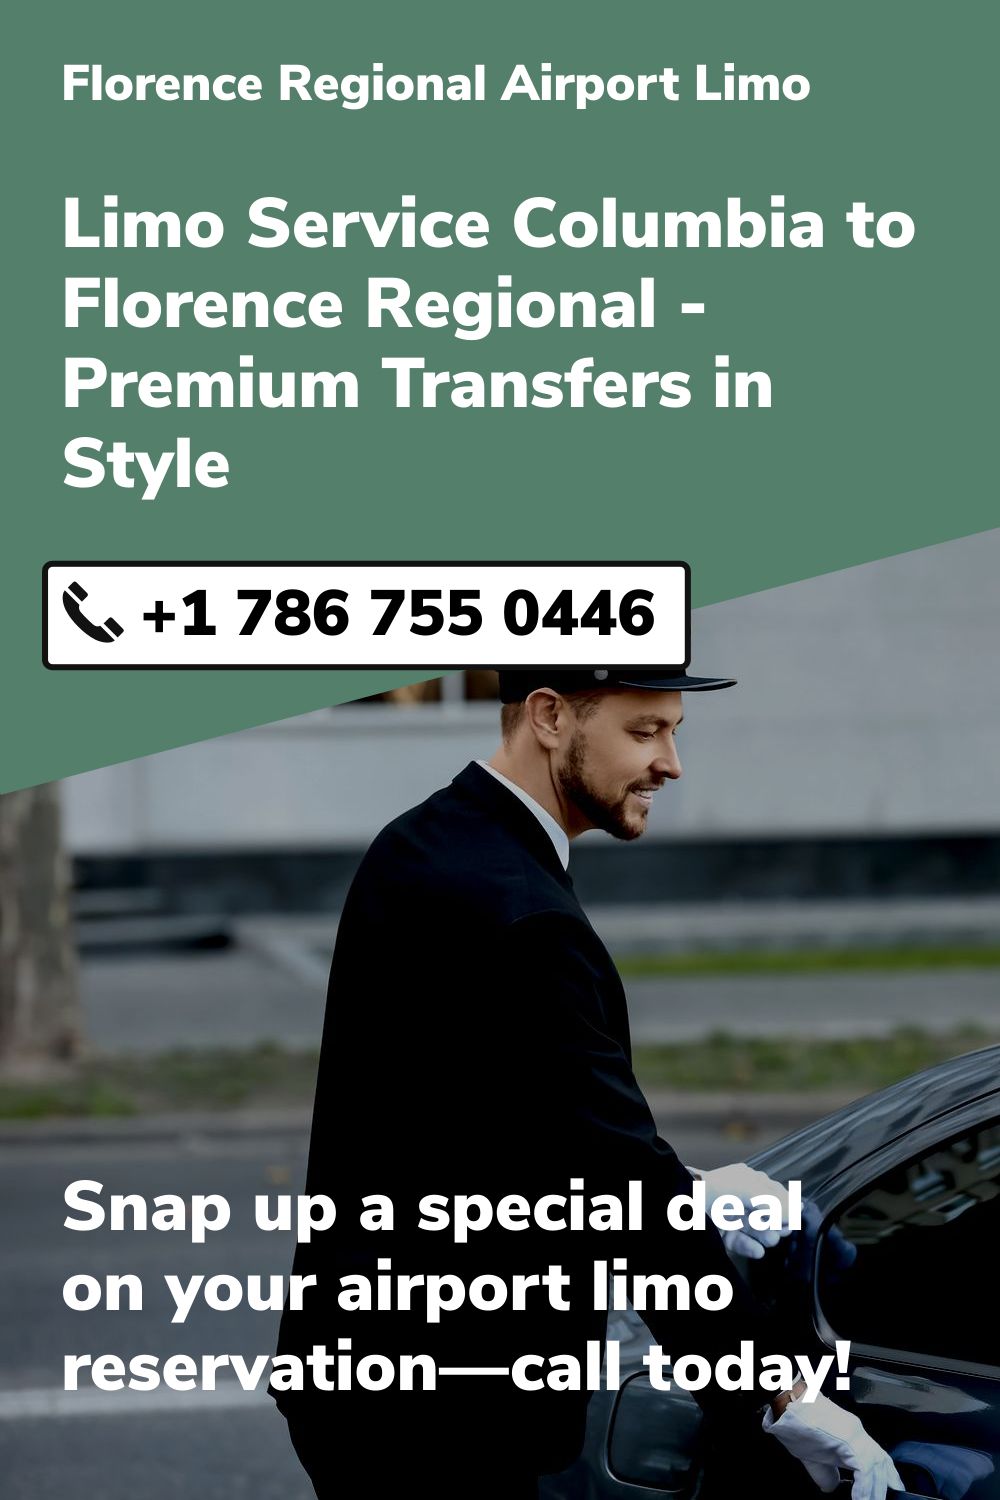 Florence Regional Airport Limo